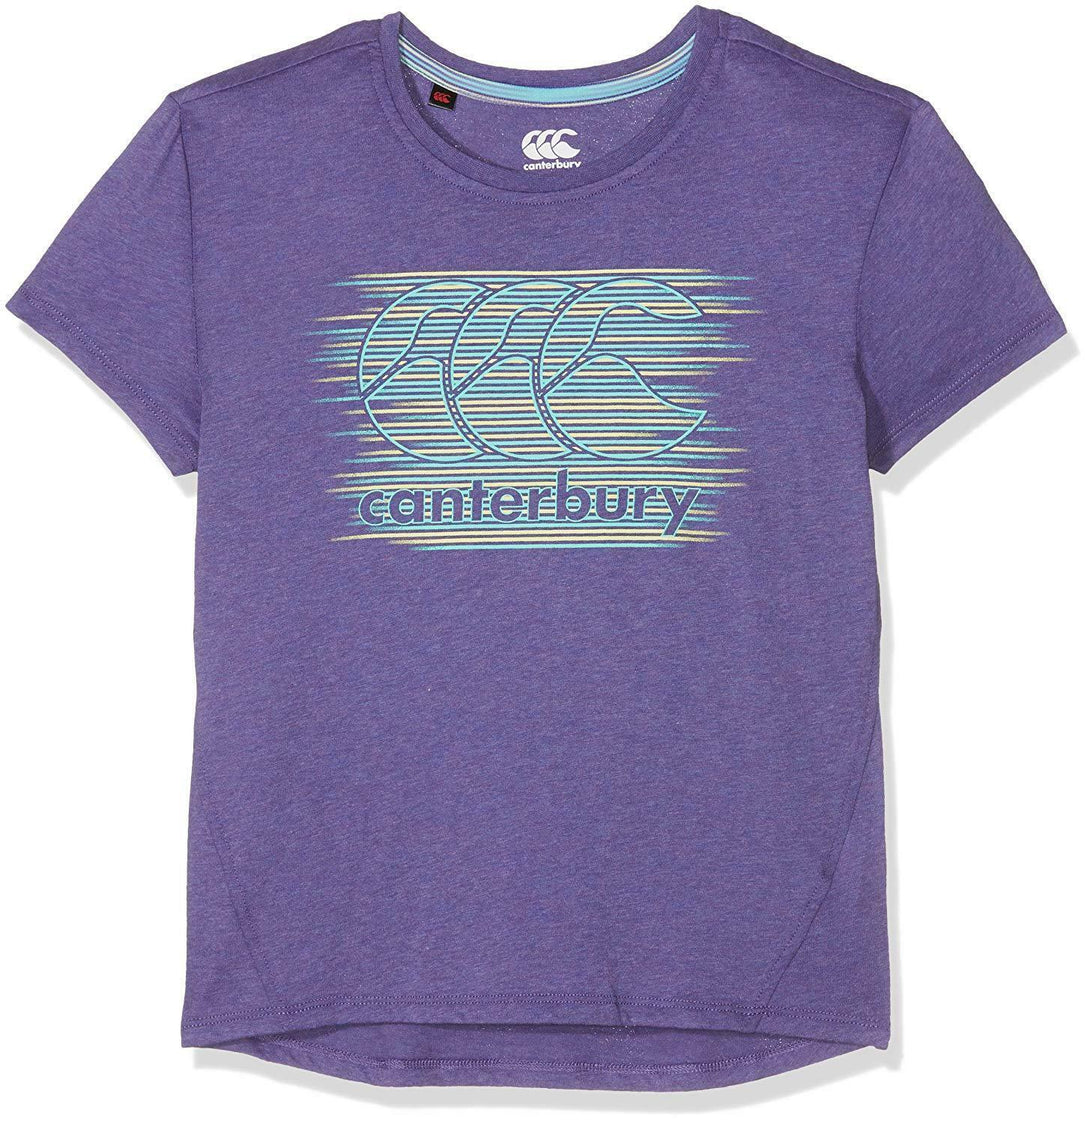 Rugby Heaven Canterbury Girl's Graphic T-Shirt - www.rugby-heaven.co.uk